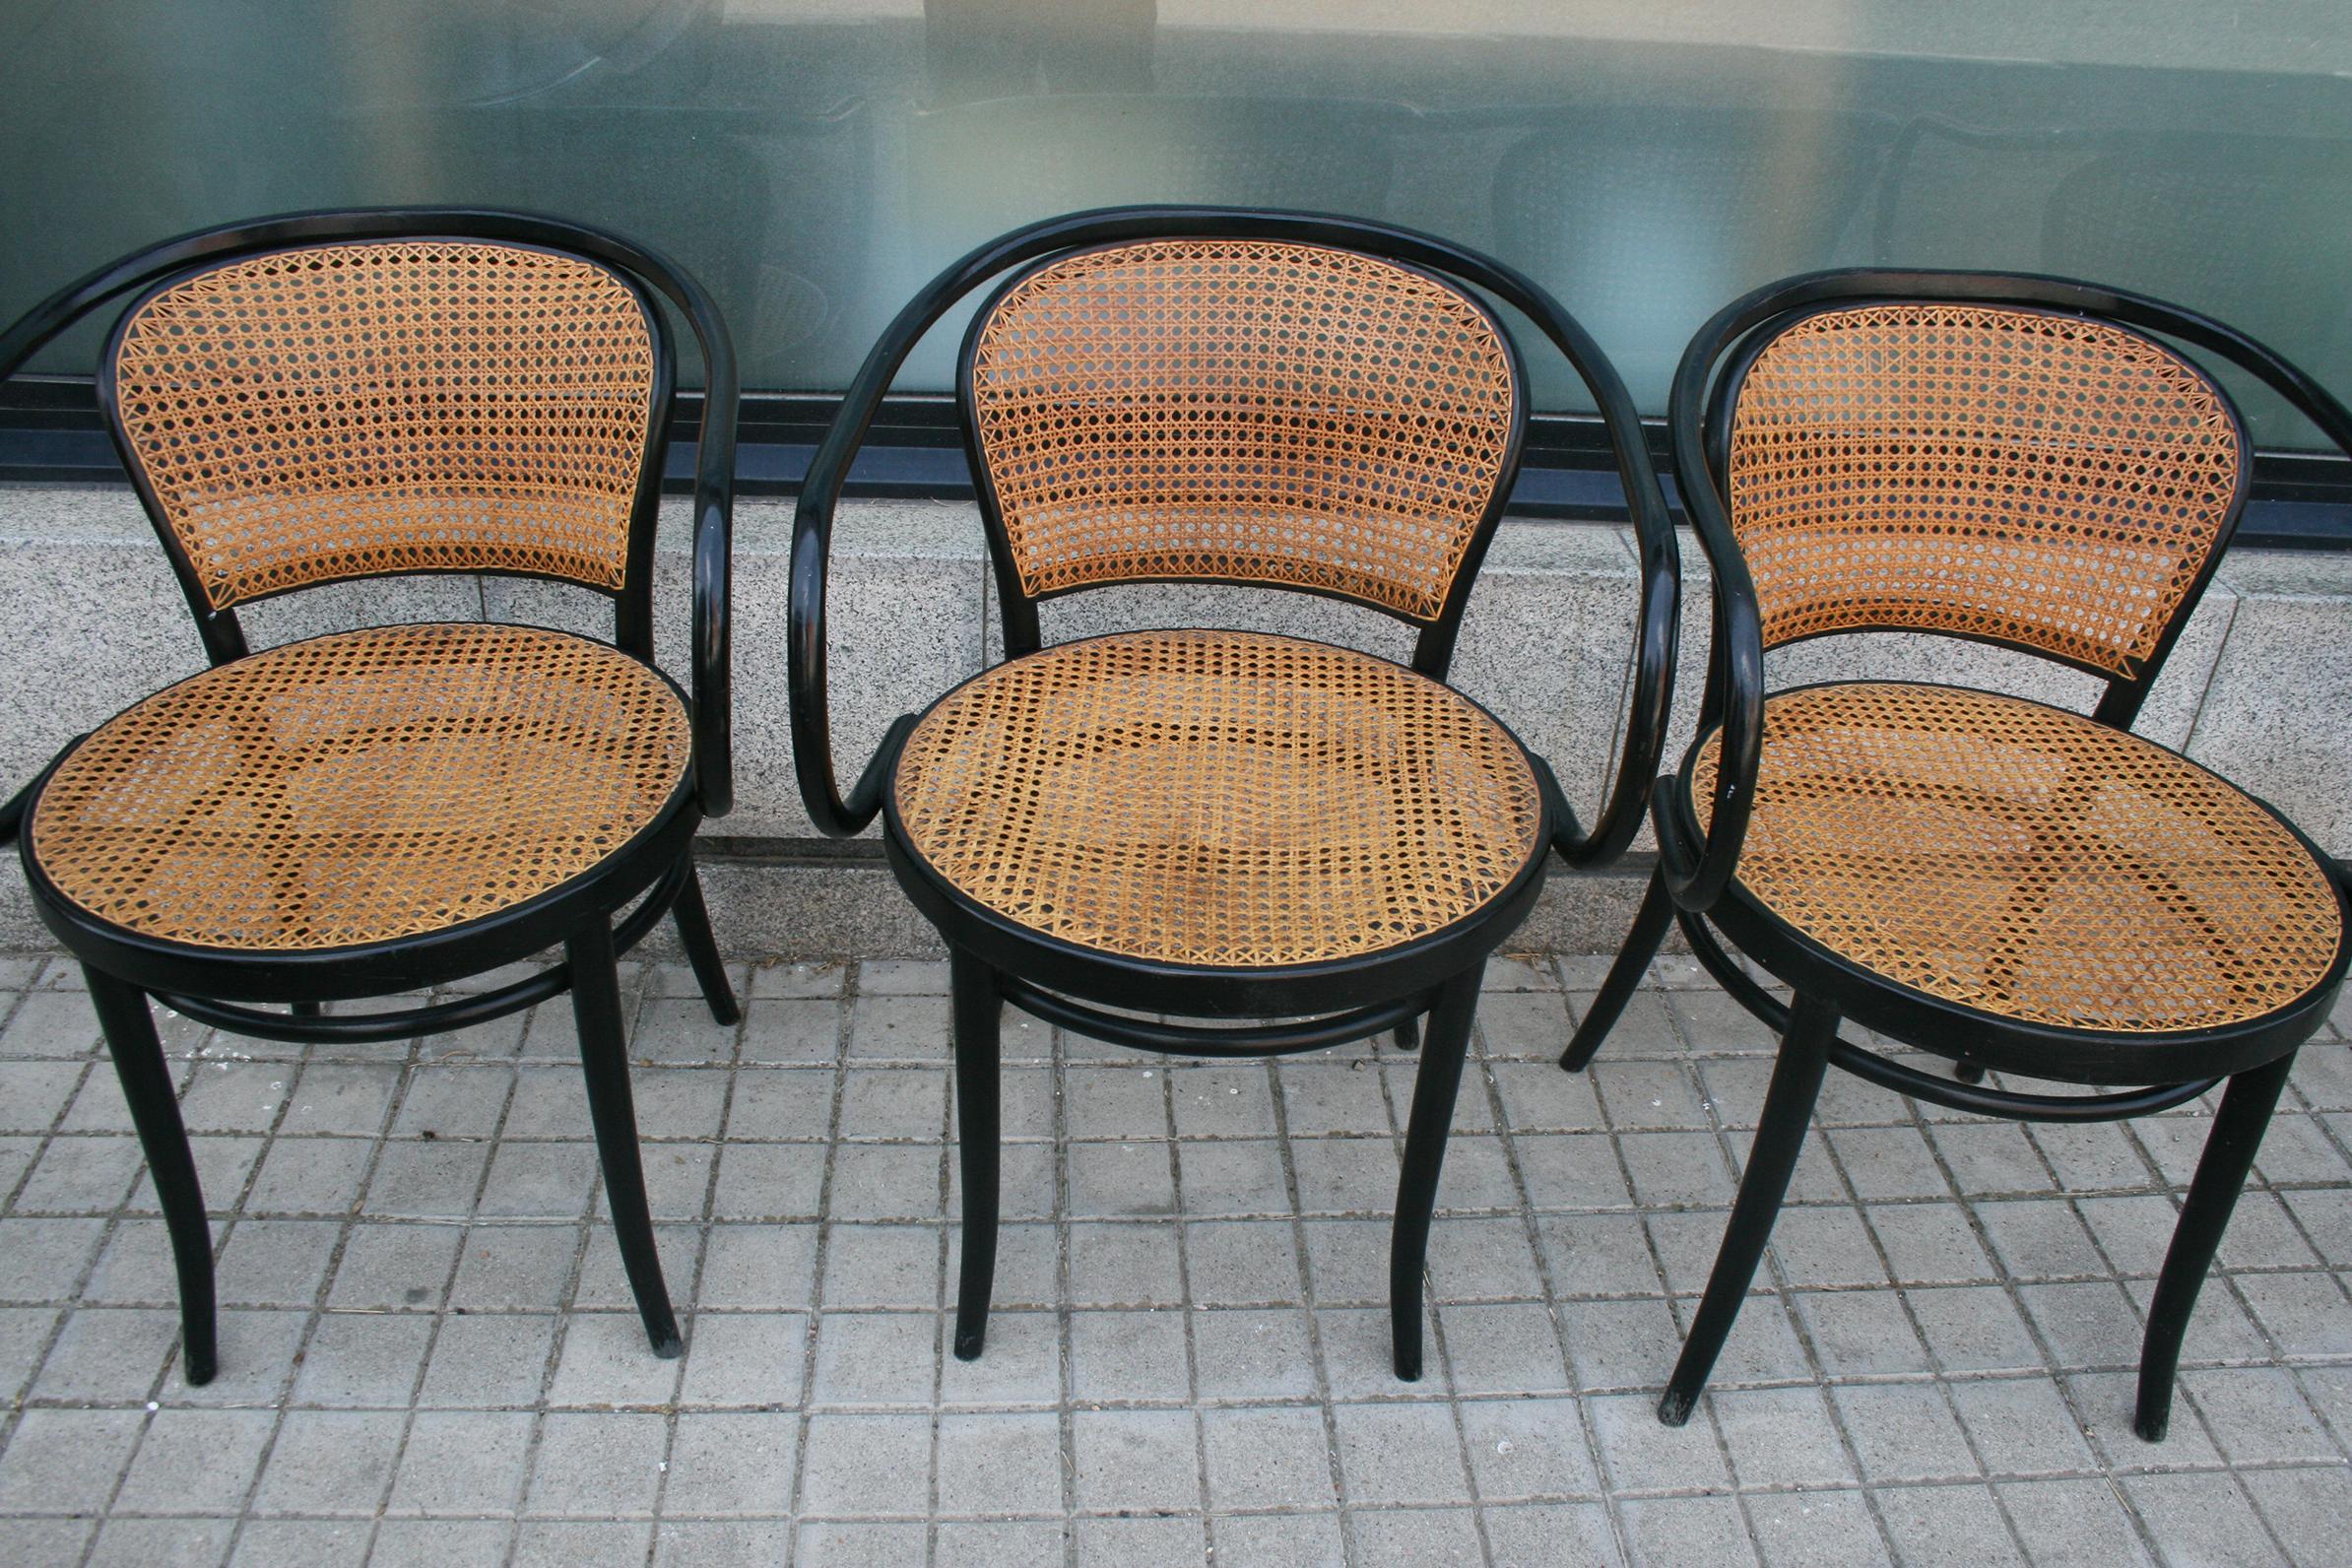 Bentwood August Thonet Chairs B9 Set of 4 , Czech Republic, Early 20th Century